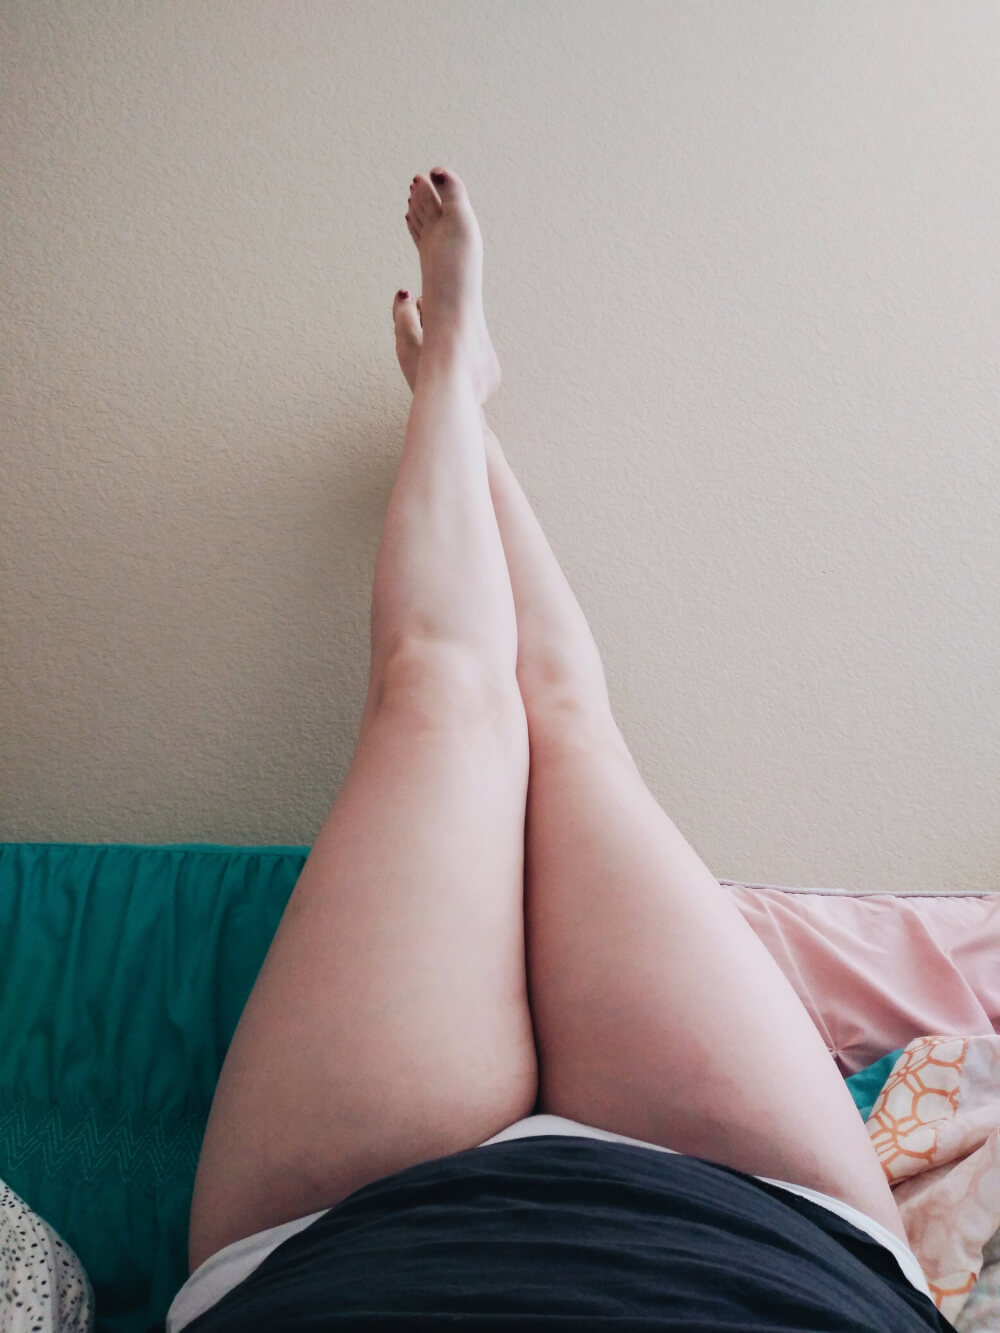 Pants-free legs up against the wall on my bed